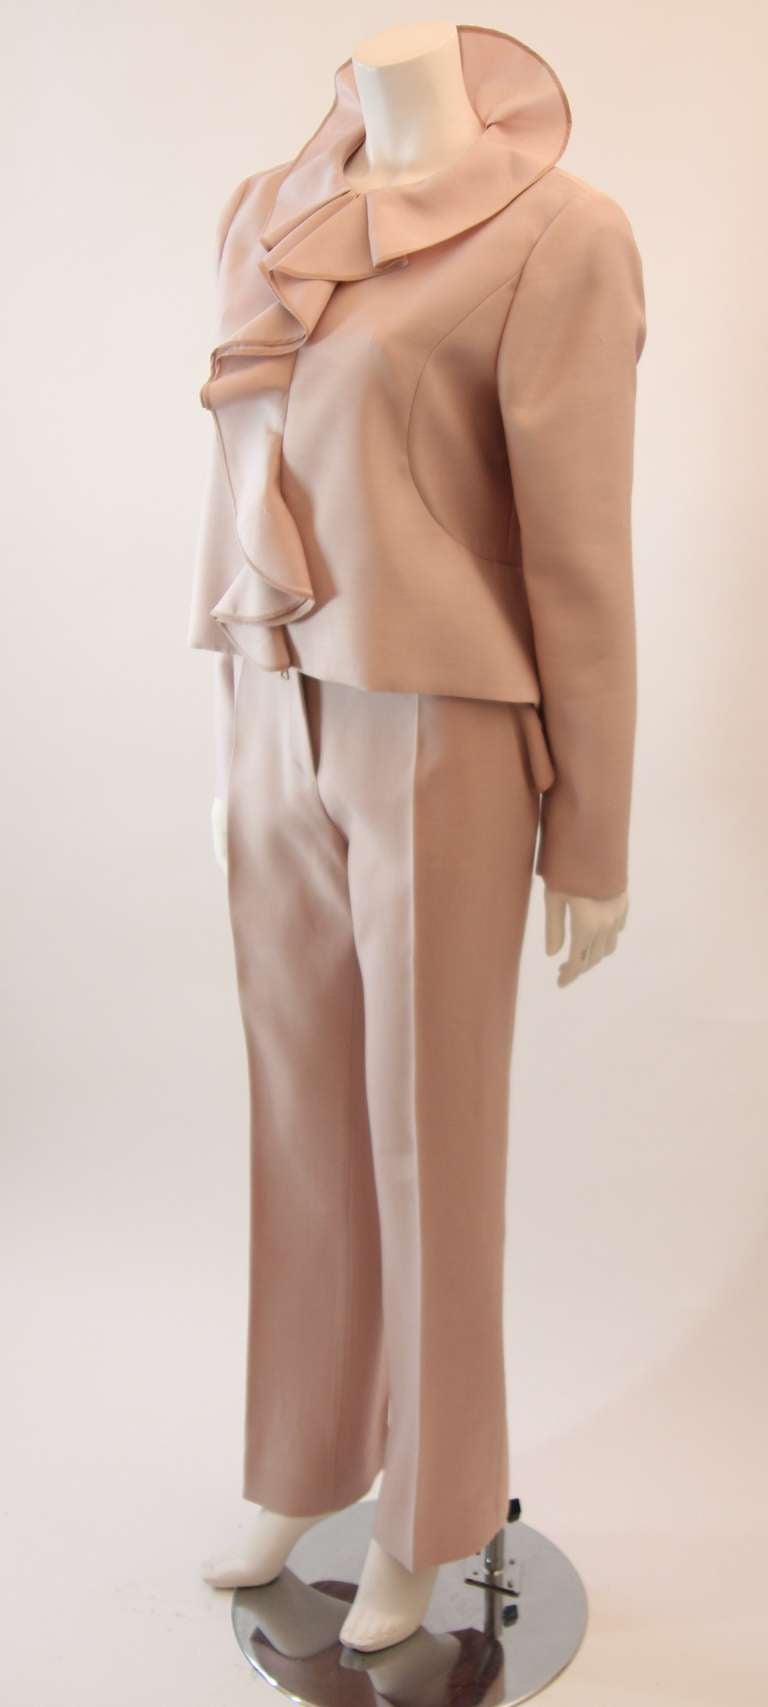 This Valentino is superb. The fantastic cascading ruffles and flower petal design is complimented by the wonderful pink hue of this suit. The suit is composed of a wonderful silk wool blend. The jacket features a zipper closure and a moderate back